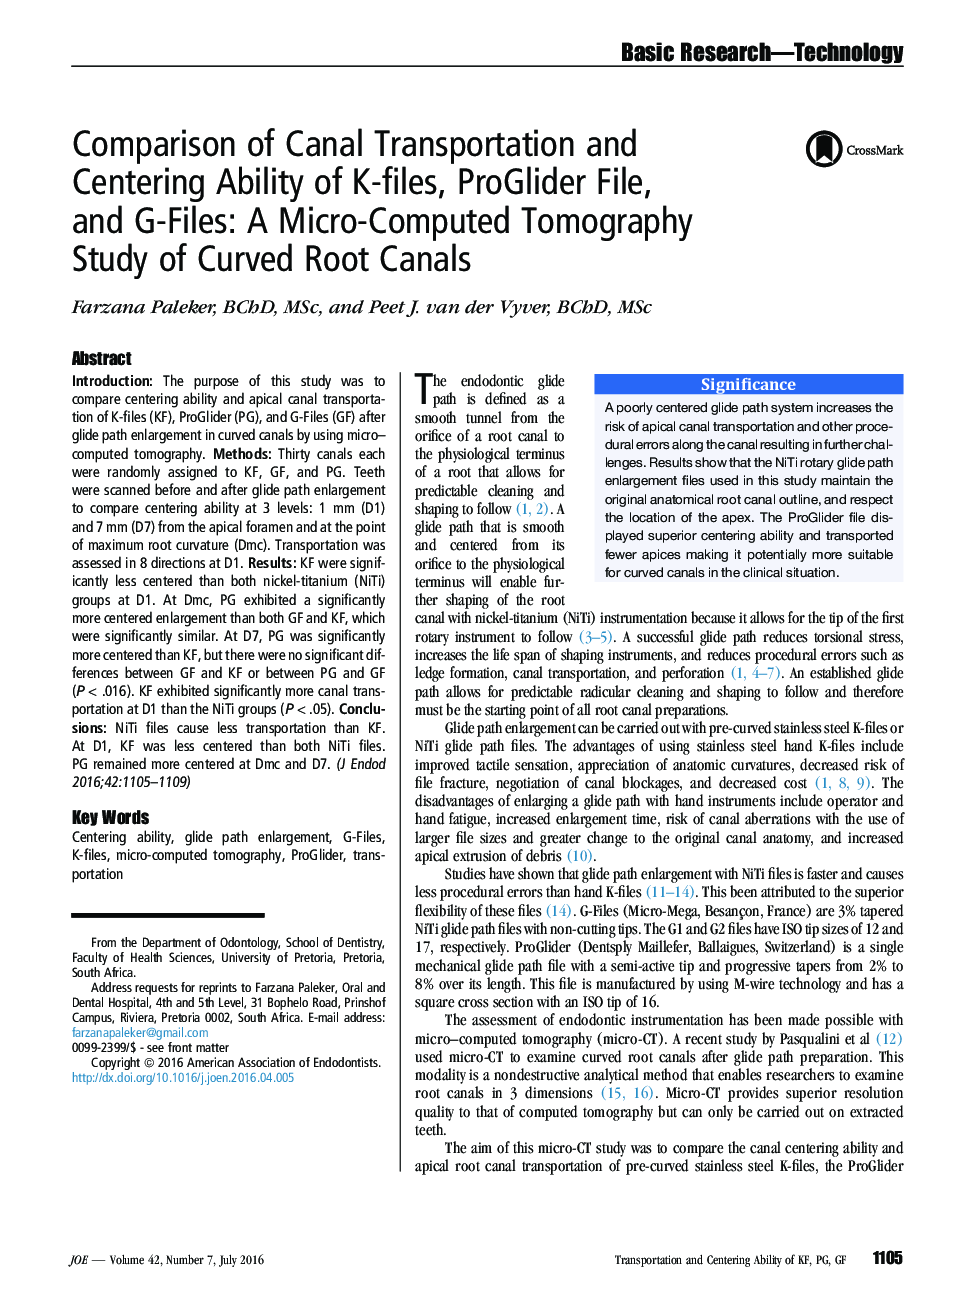 Comparison of Canal Transportation and Centering Ability of K-files, ProGlider File, and G-Files: A Micro-Computed Tomography Study of Curved Root Canals